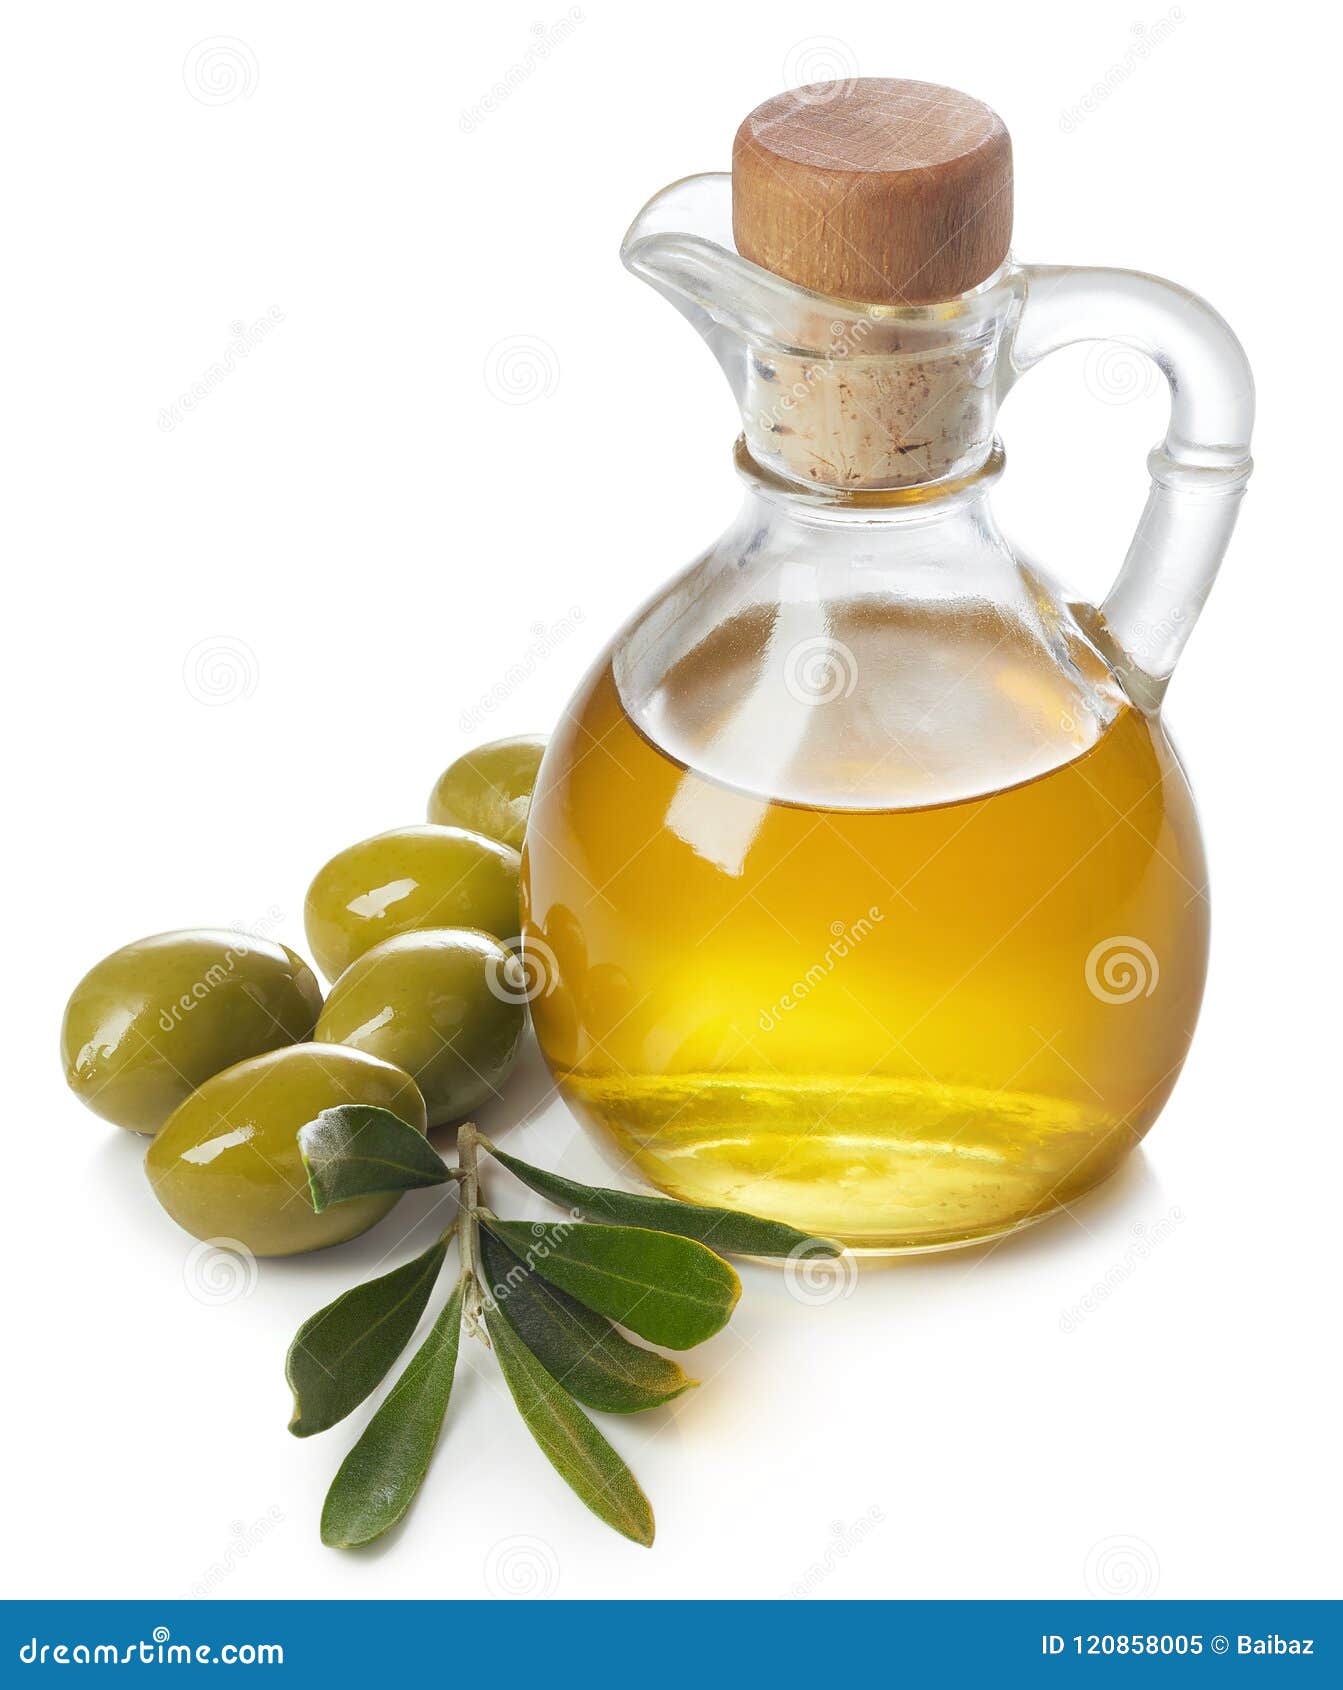 A bottle of olive oil. Масло оливы. Оливковое масло. Бутылка для масла. Бутылка оливкового масла.